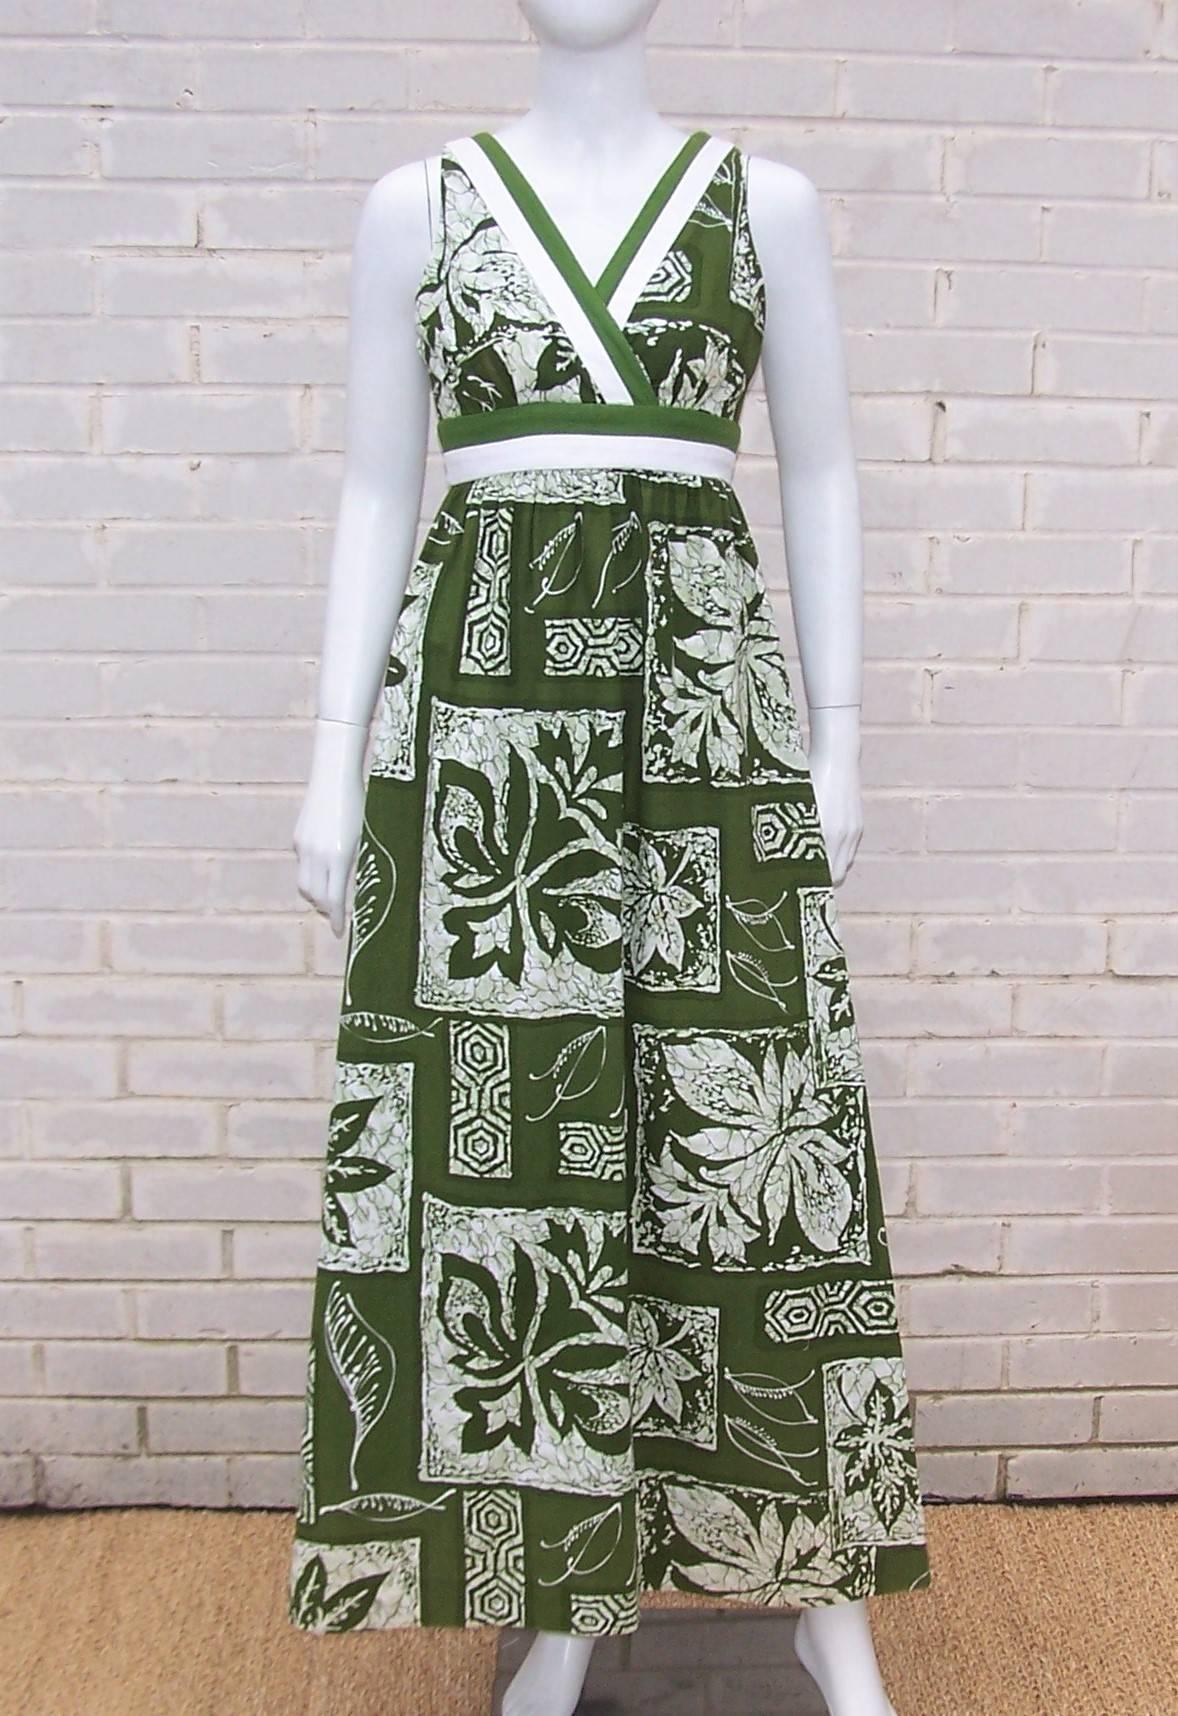 This fun maxi length sundress has quite a Hawaiian pedigree including two labels from both Penelope and Liberty House both famous Hawaiian retailers and manufacturers of quality apparel with an island flair.  The easy style and tropical fabric are